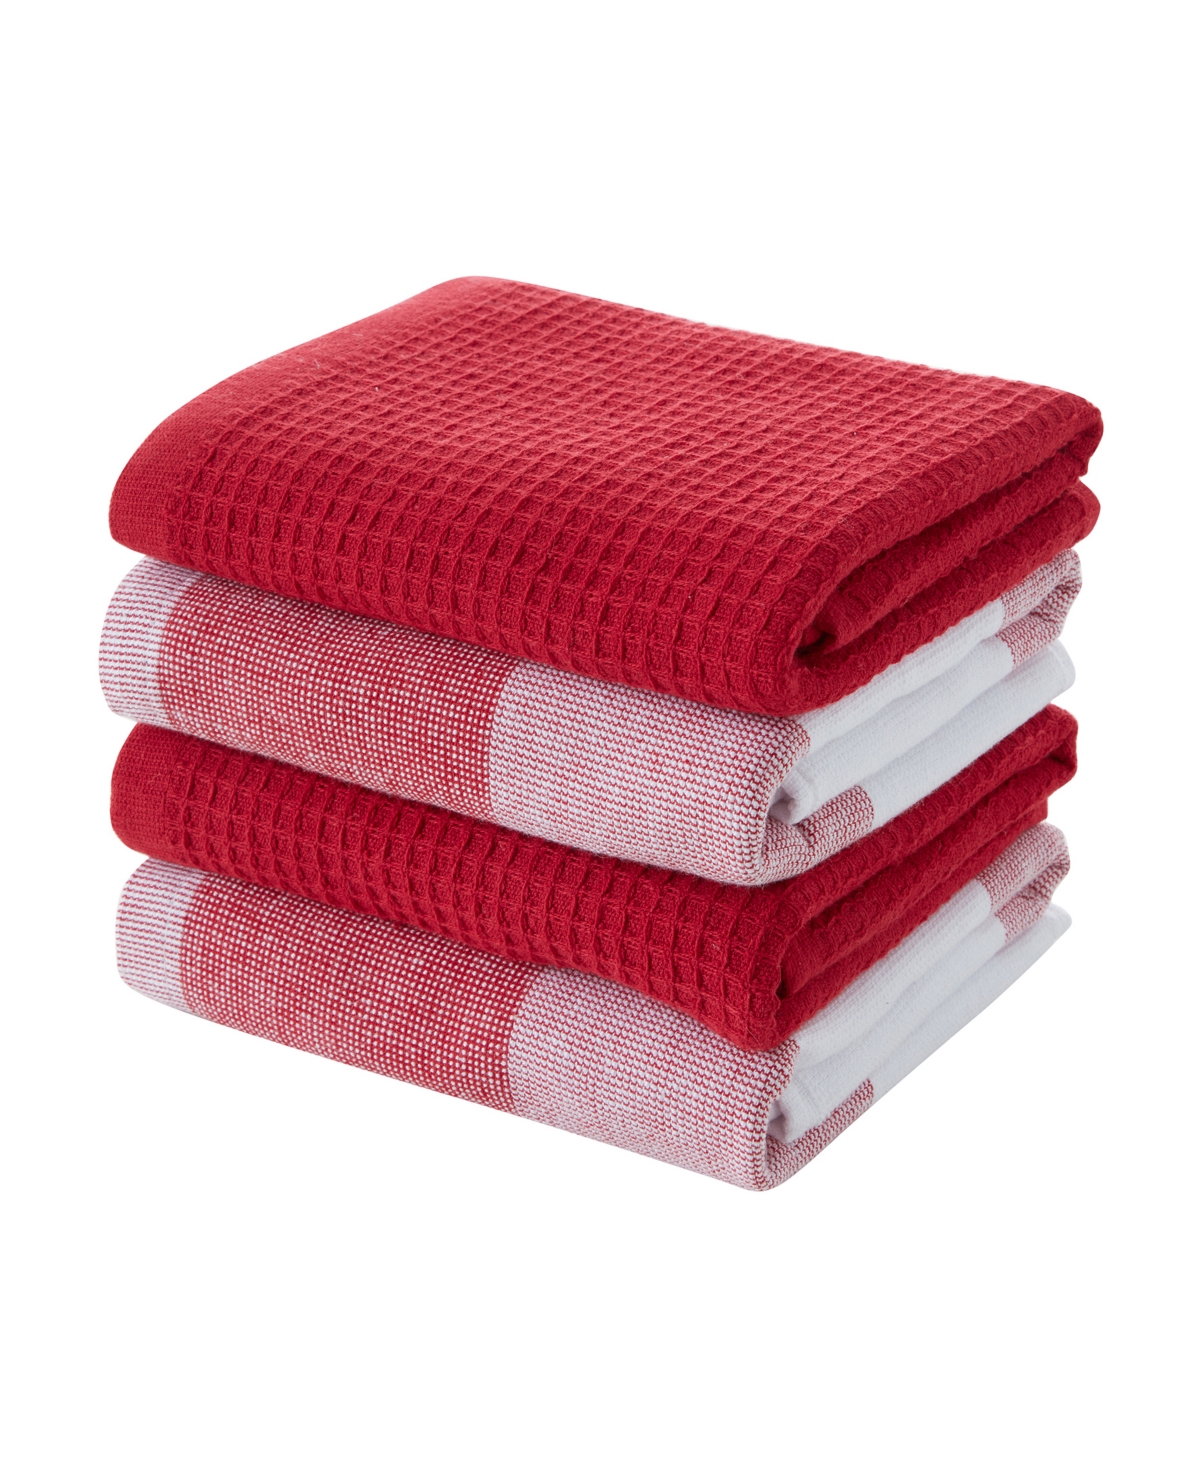 Jackson, Olivia Kitchen Towel, Pack of 4 - Red